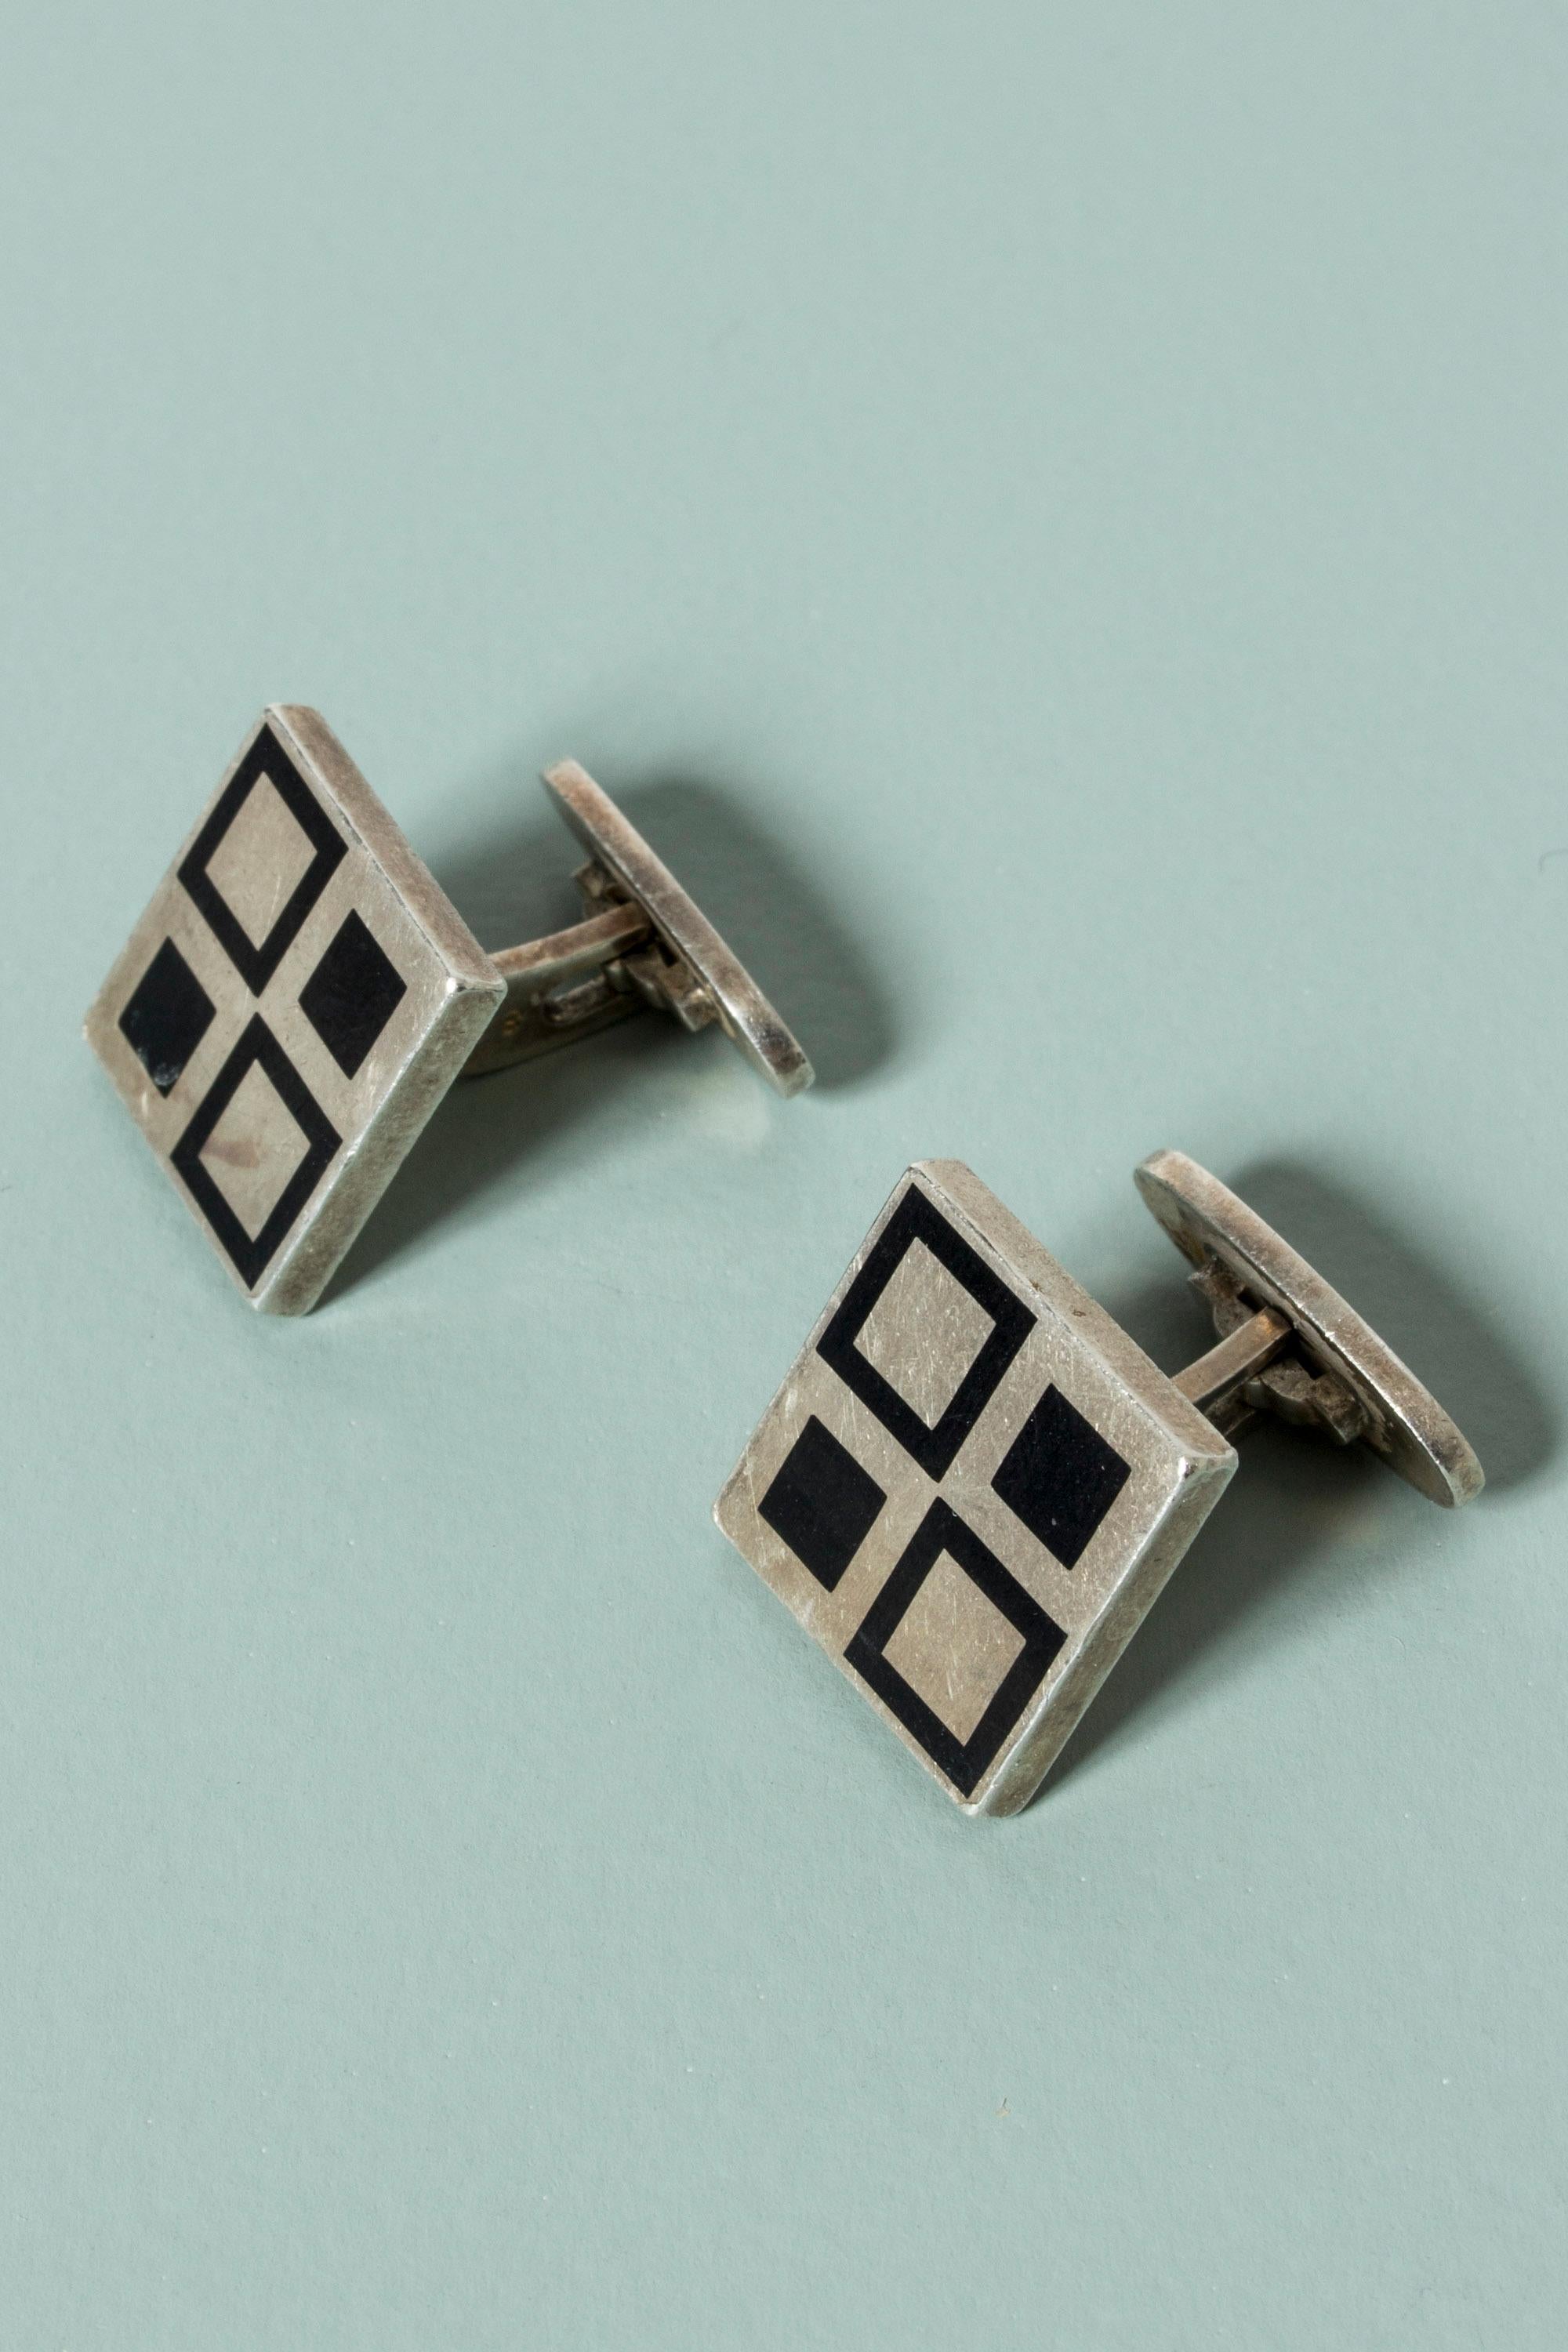 Pair of cool silver cufflinks by Magnus Steffensen with a graphic pattern in black enamel. Crisp and playful design that stands out.